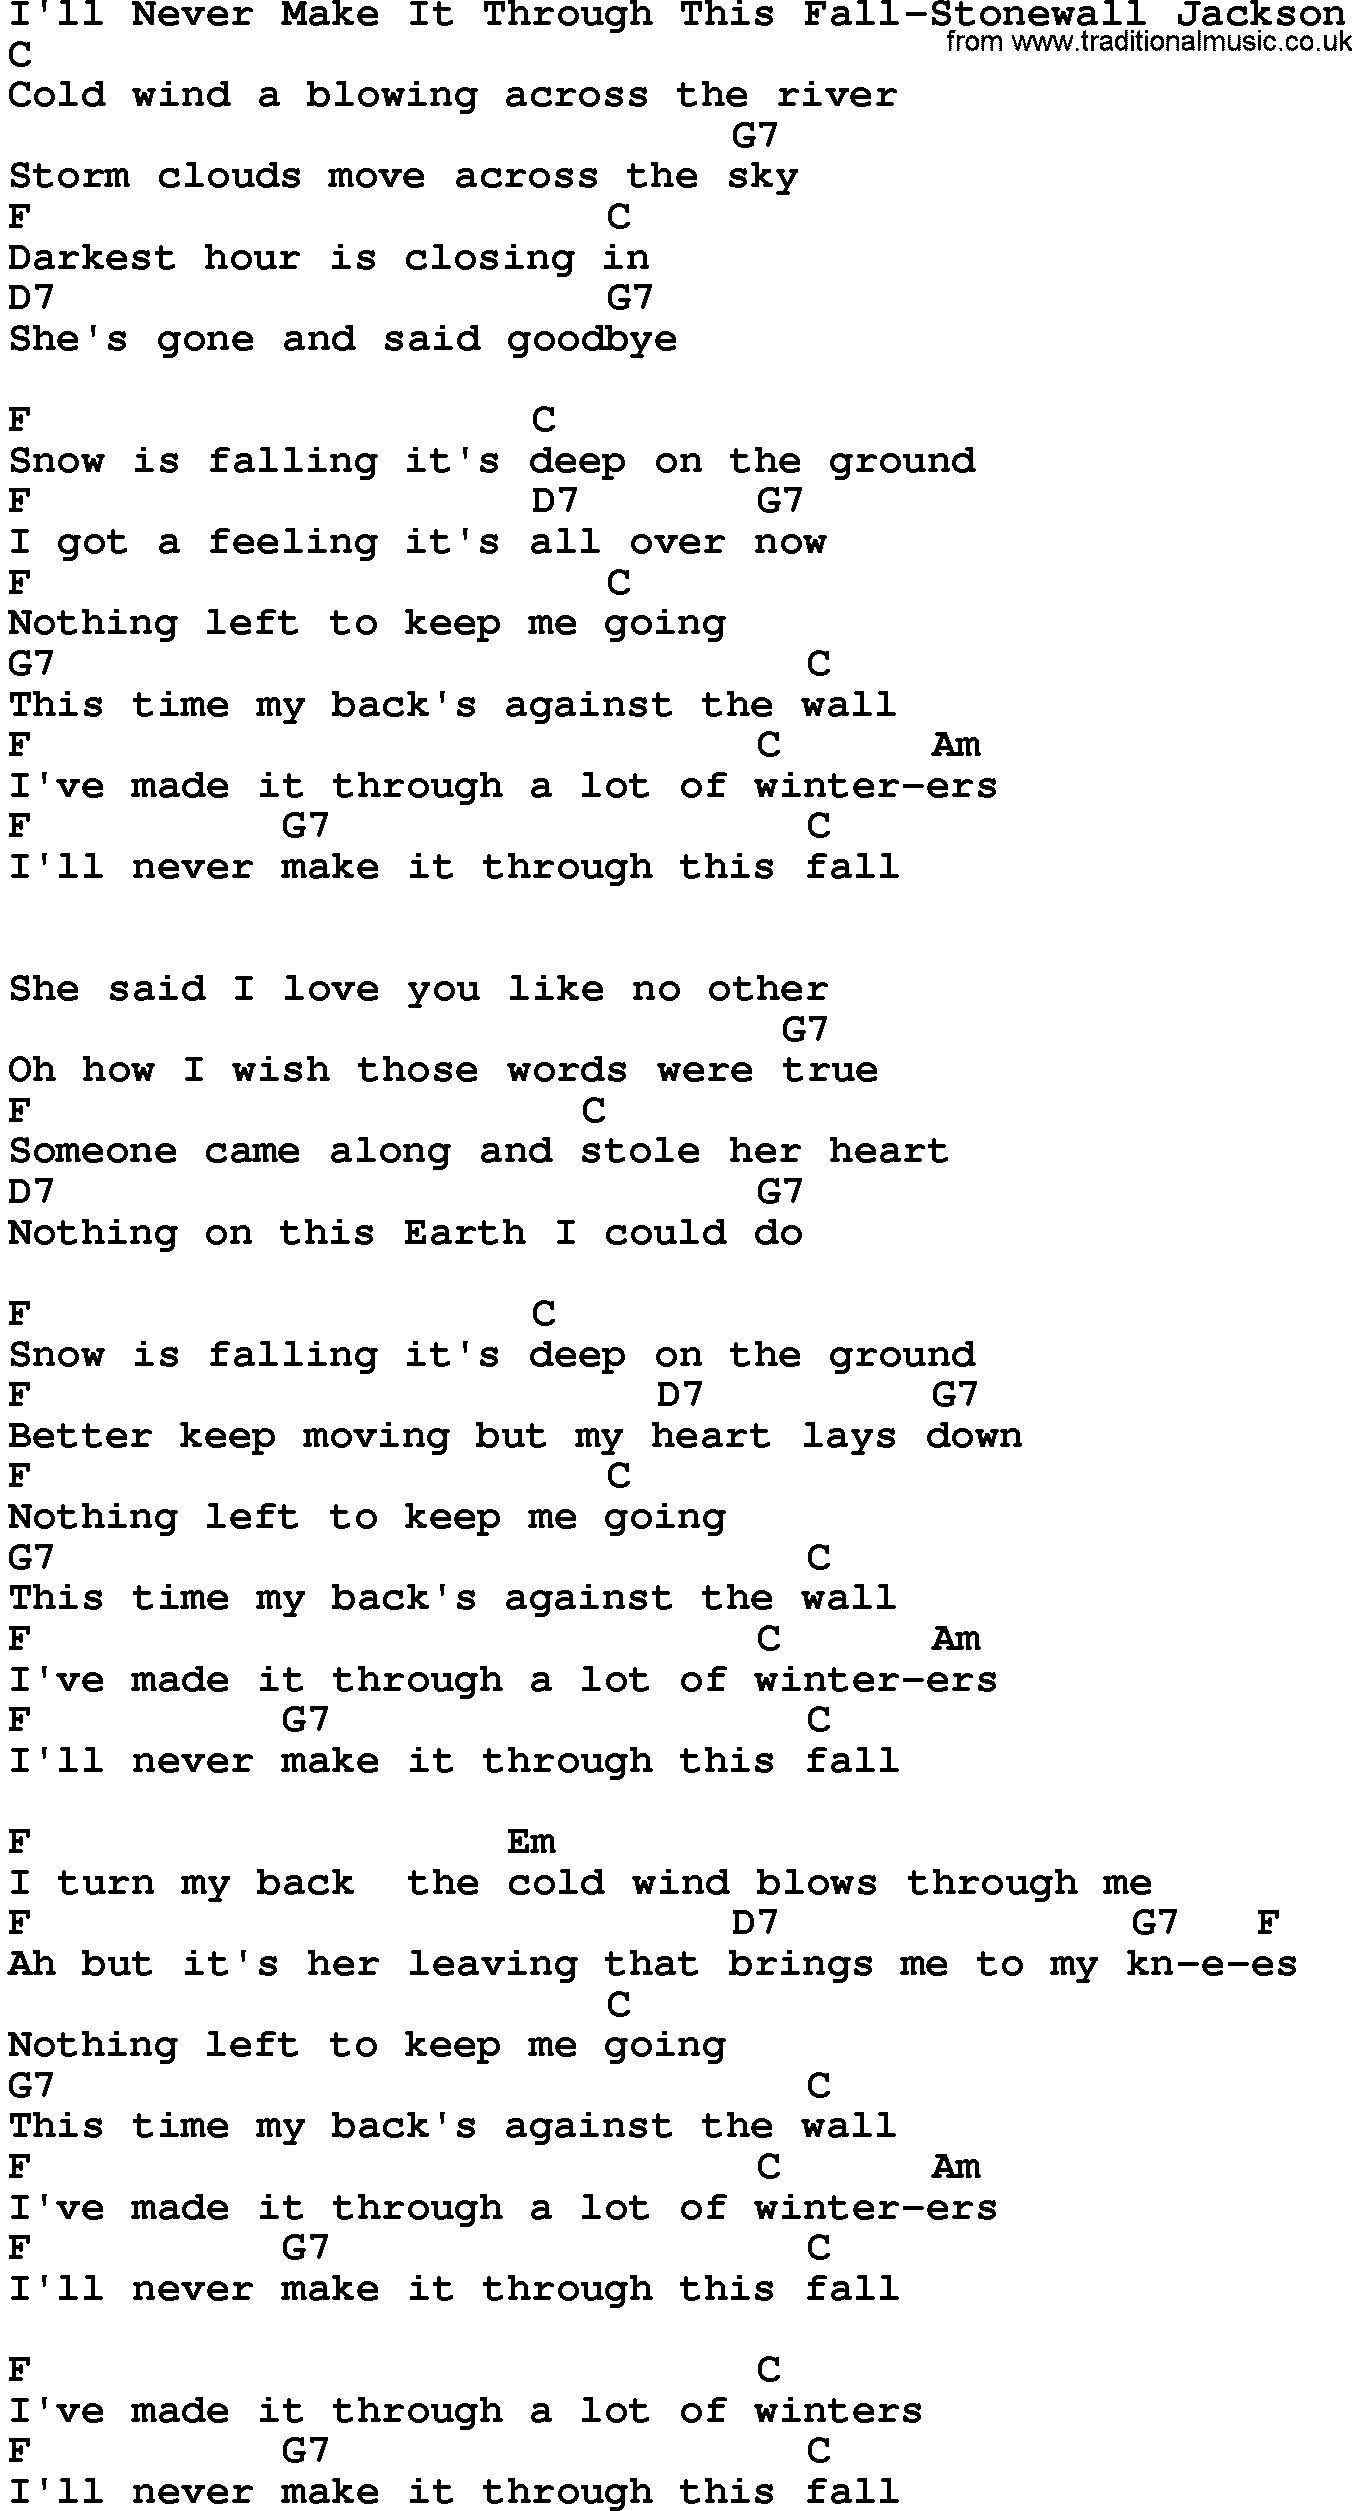 Country music song: I'll Never Make It Through This Fall-Stonewall Jackson lyrics and chords